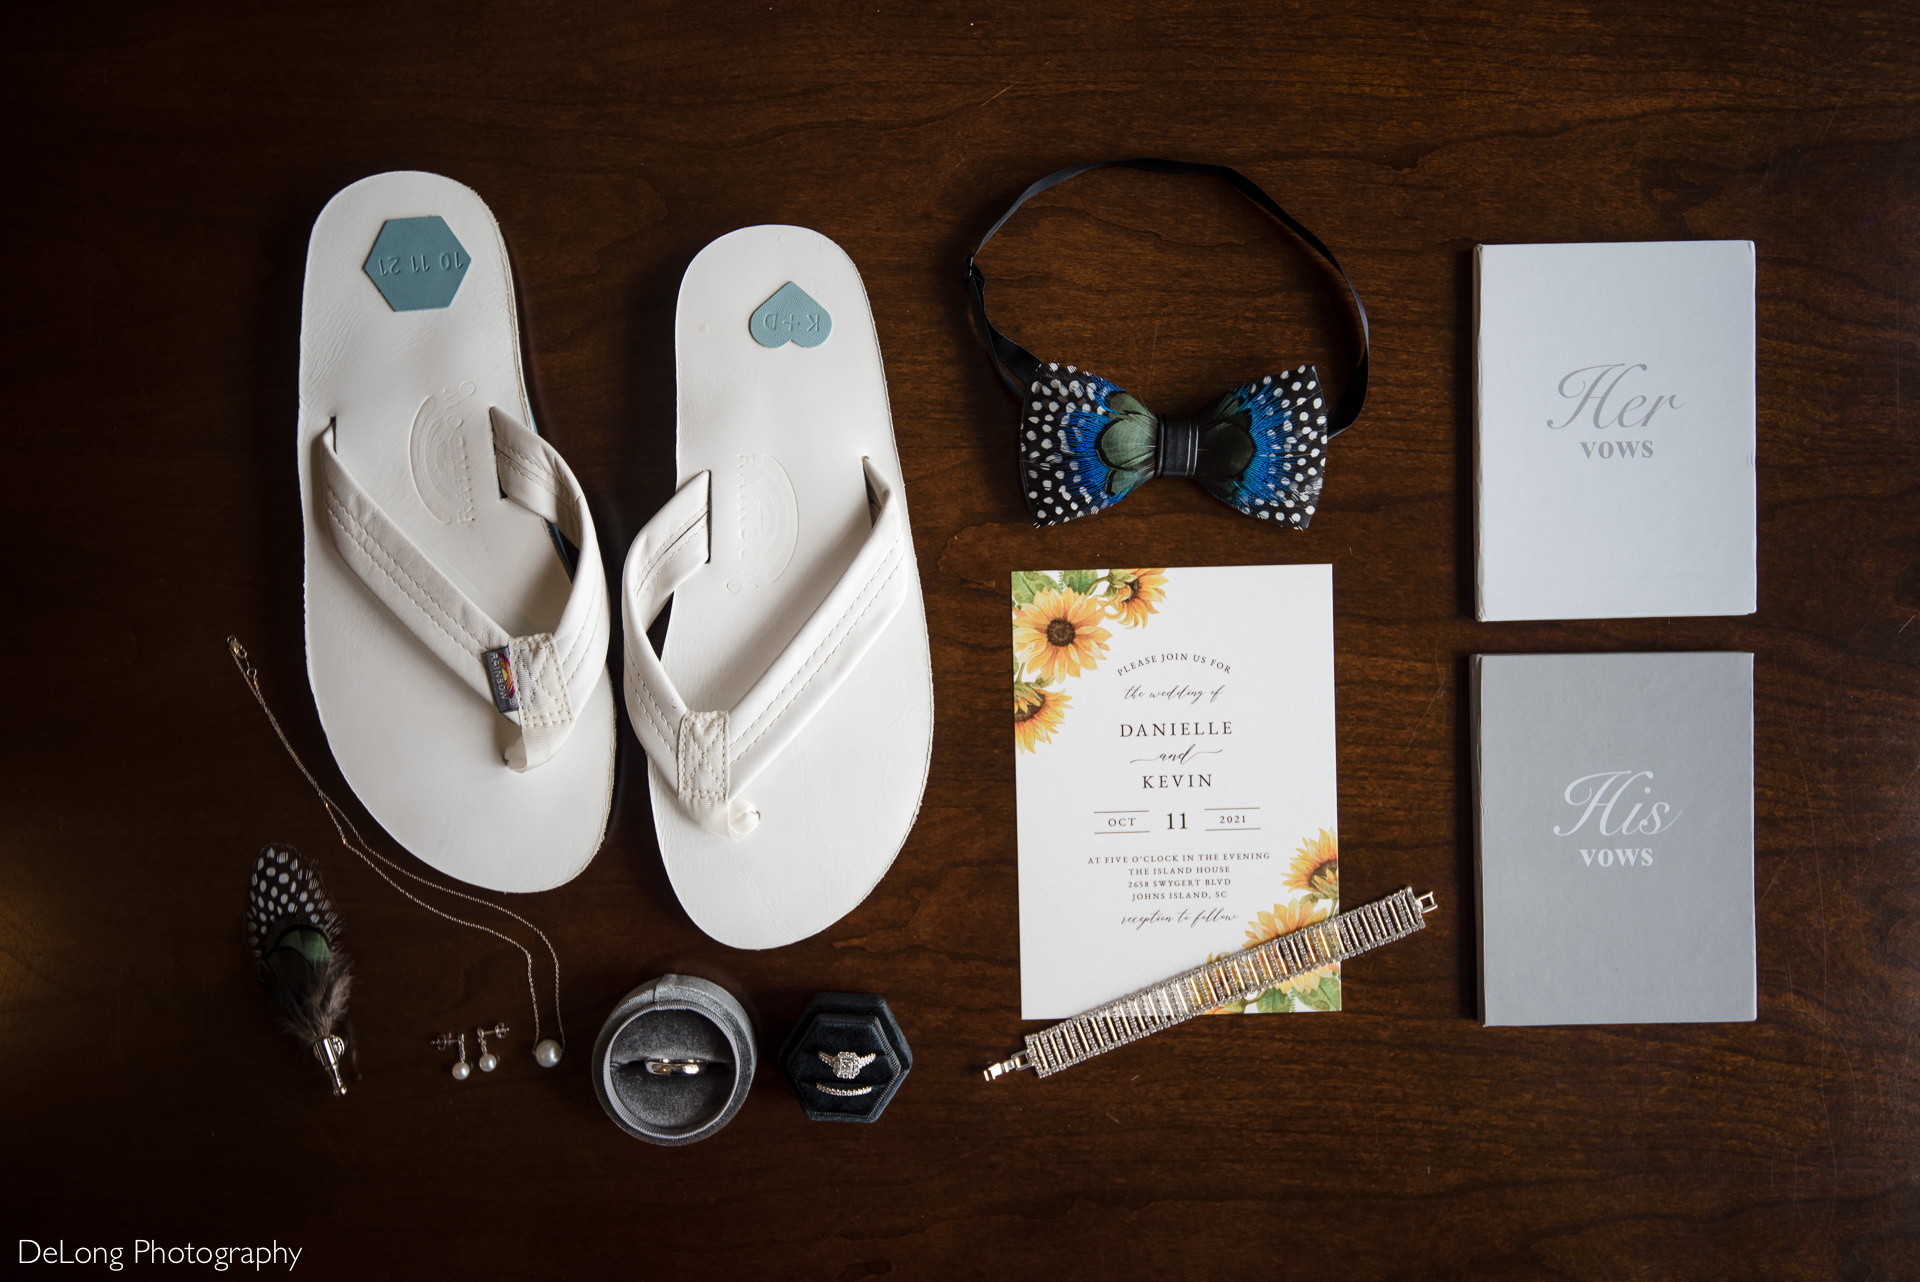 Flat lay of wedding details including shoes, invitation, bow tie, rings, and jewelry by Charlotte Wedding Photographers DeLong Photography